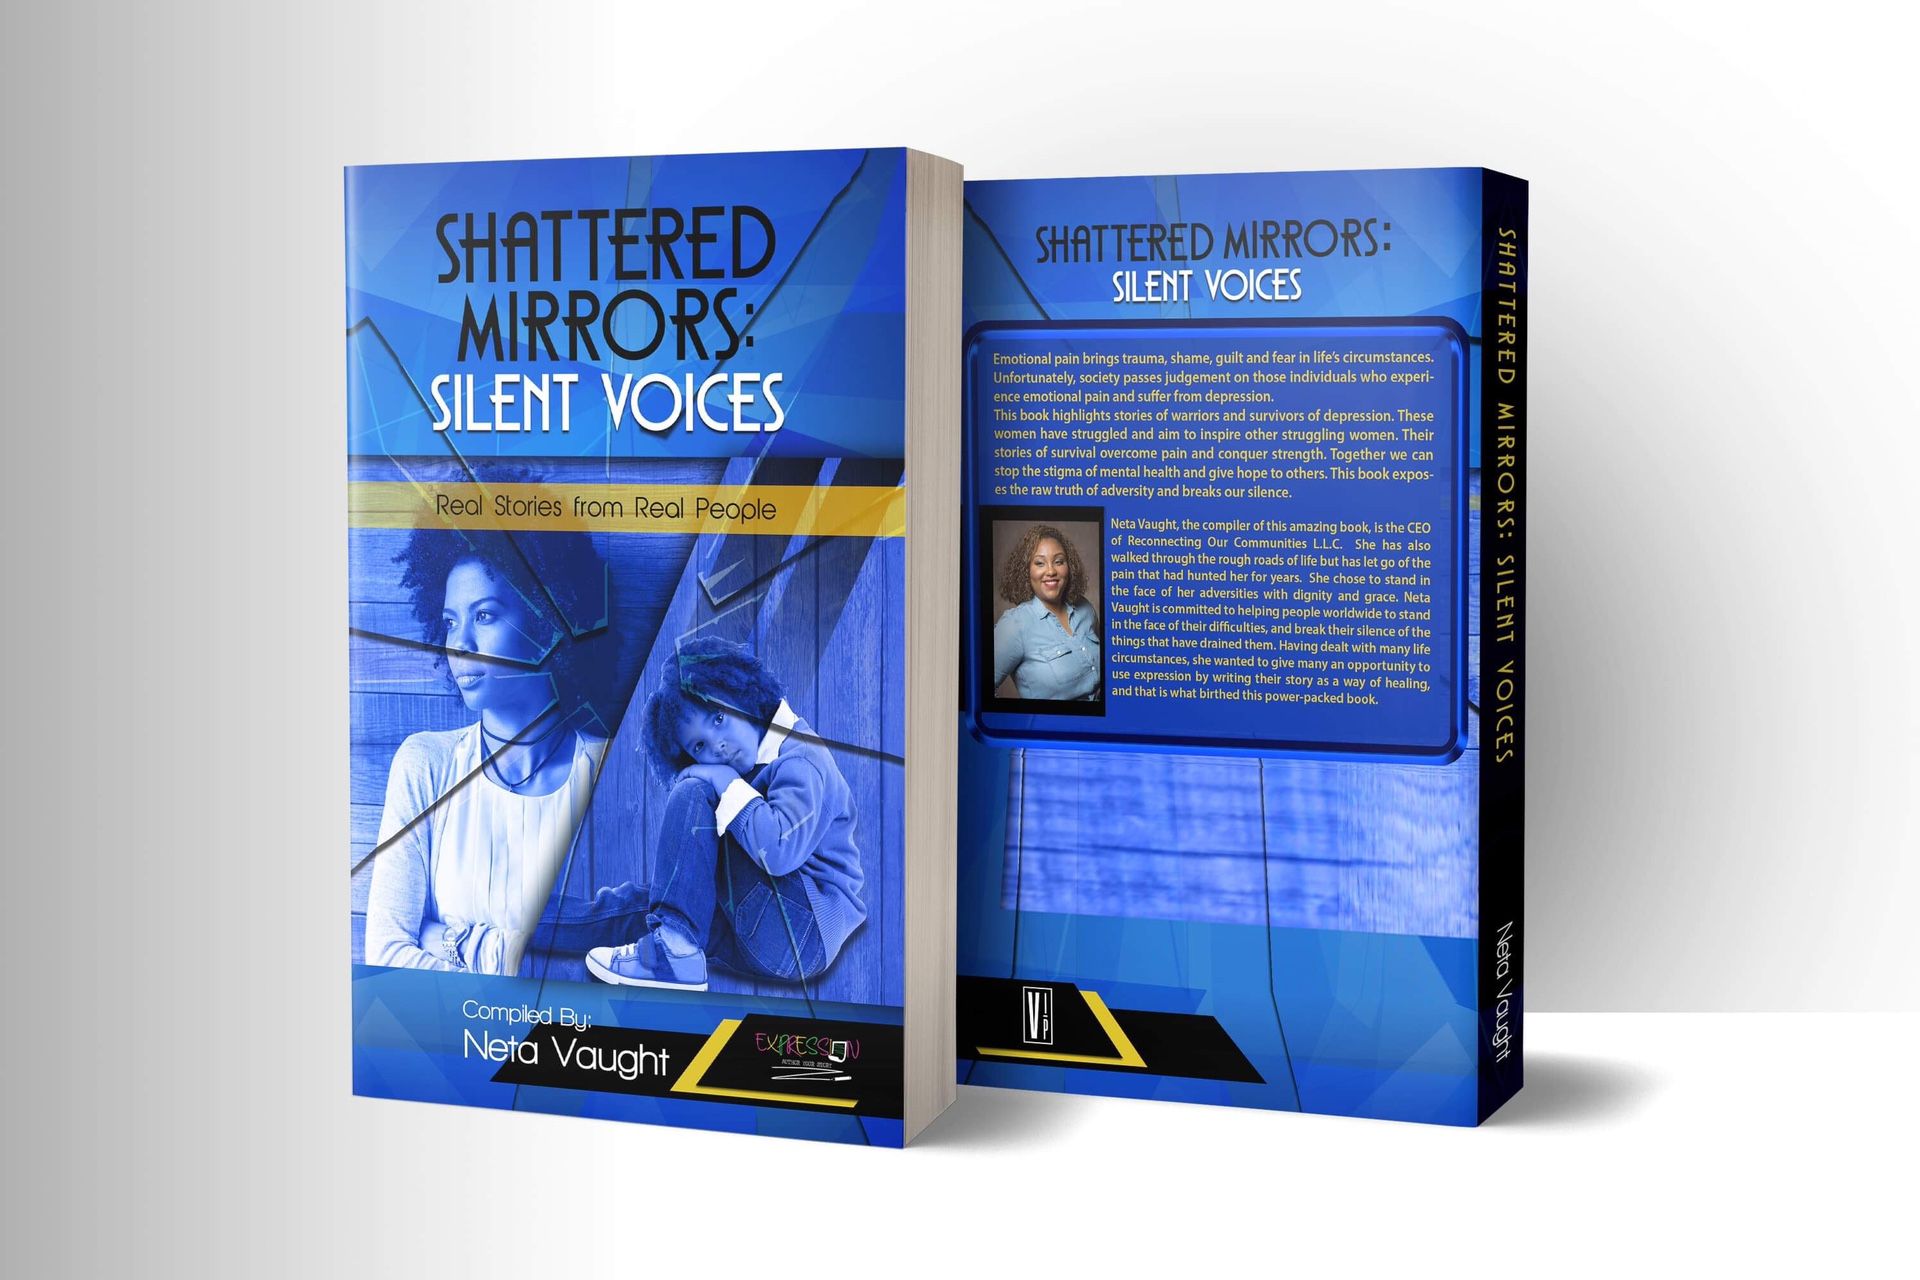 Shattered Mirrors: Silent Voices